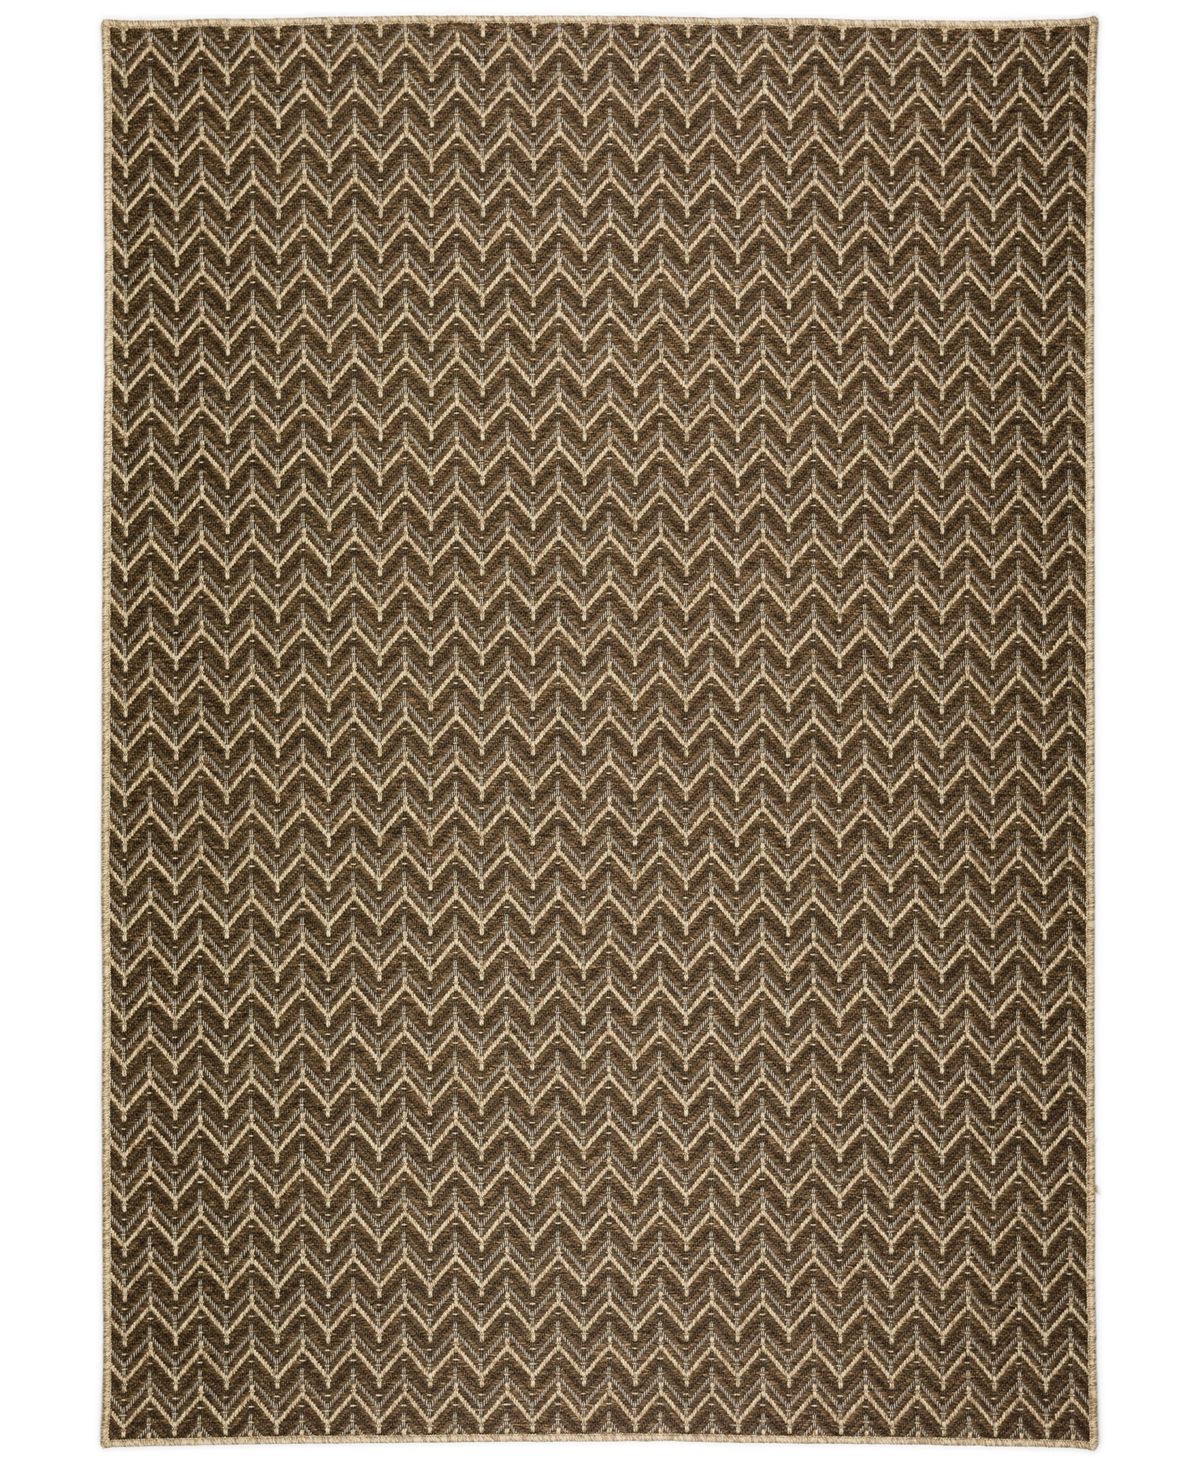 D Style Nusa Outdoor Nsa1 10' X 13' Area Rug In Chocolate